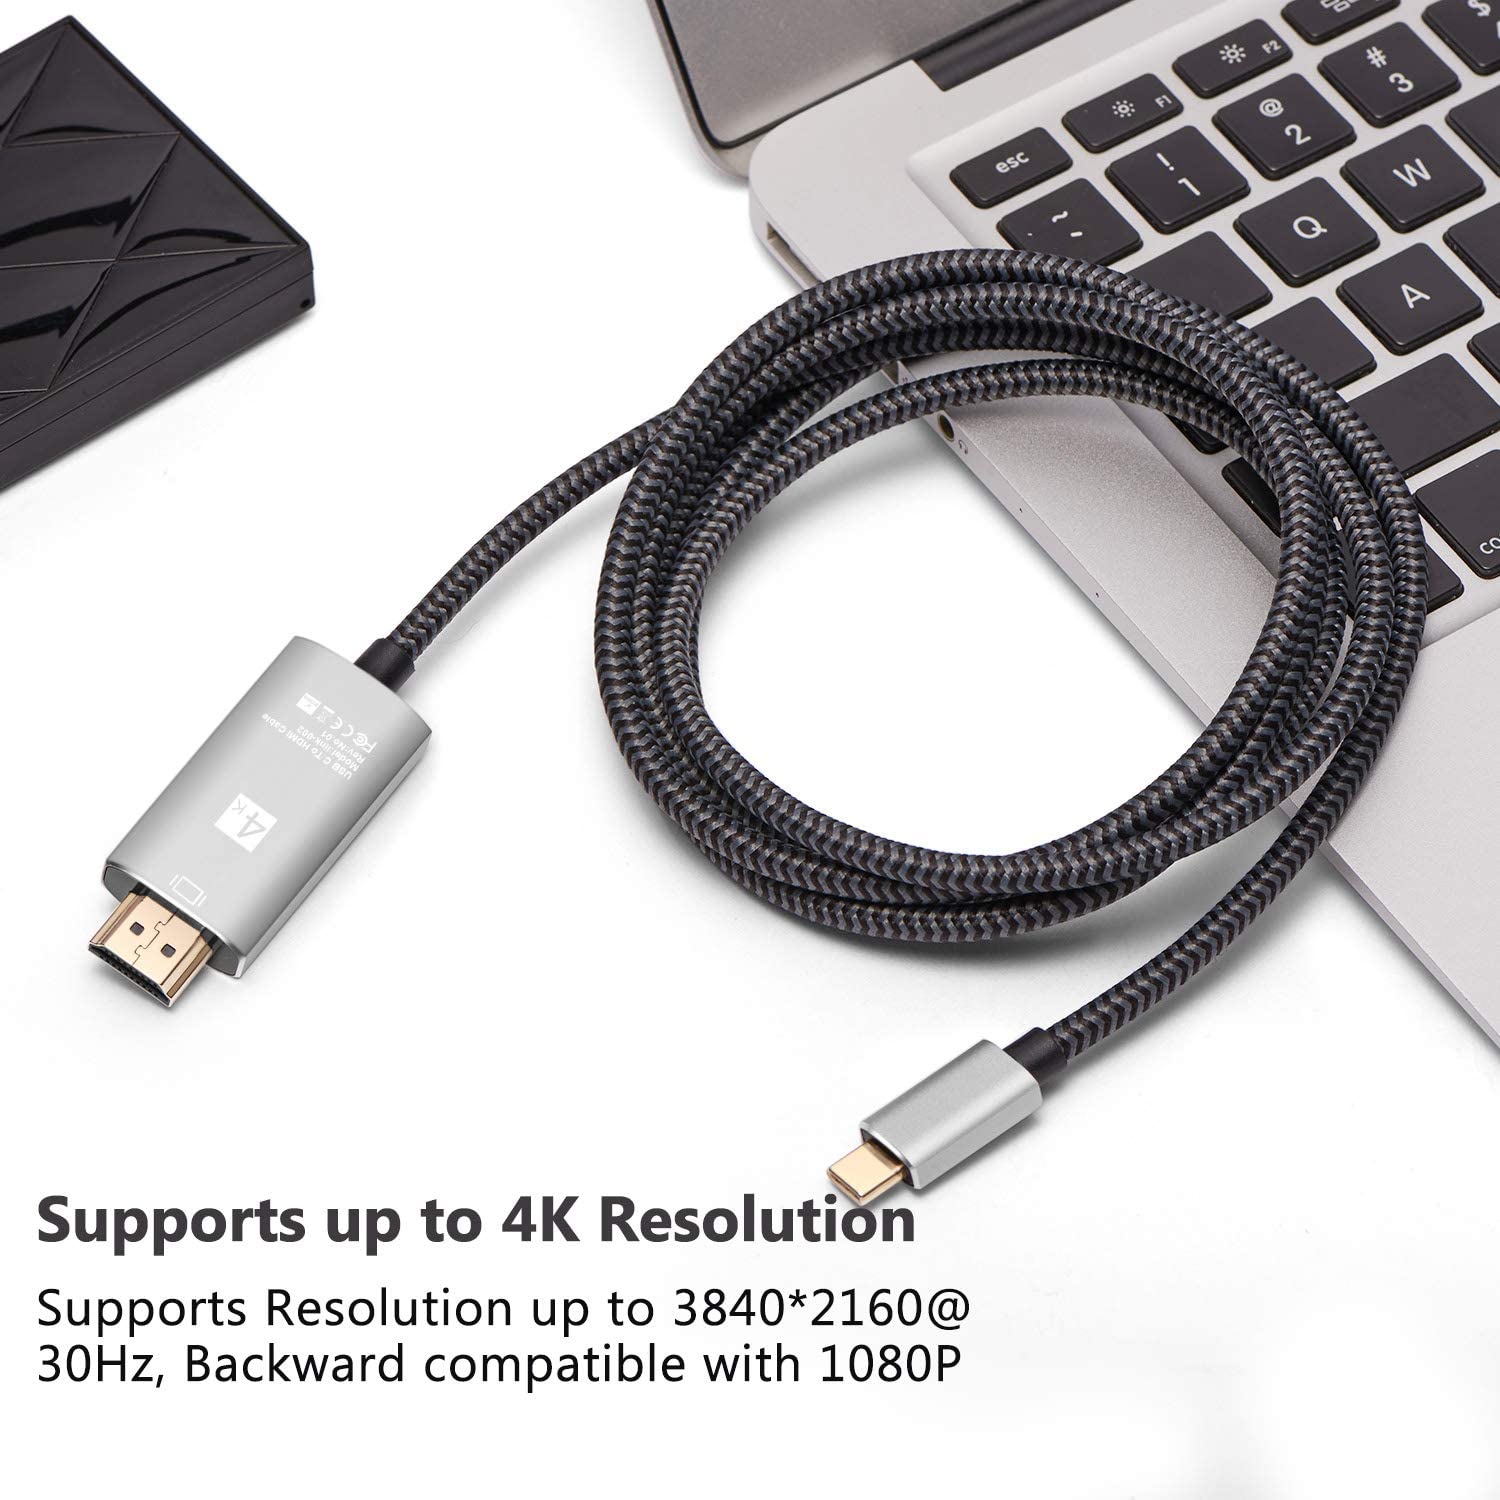 USB C to HDMI Cable, CLDAY USB Type-C to HDMI Cable Thunderbolt 3 Port 4K for New MacBook/pro iPad Pro 2018 iMac